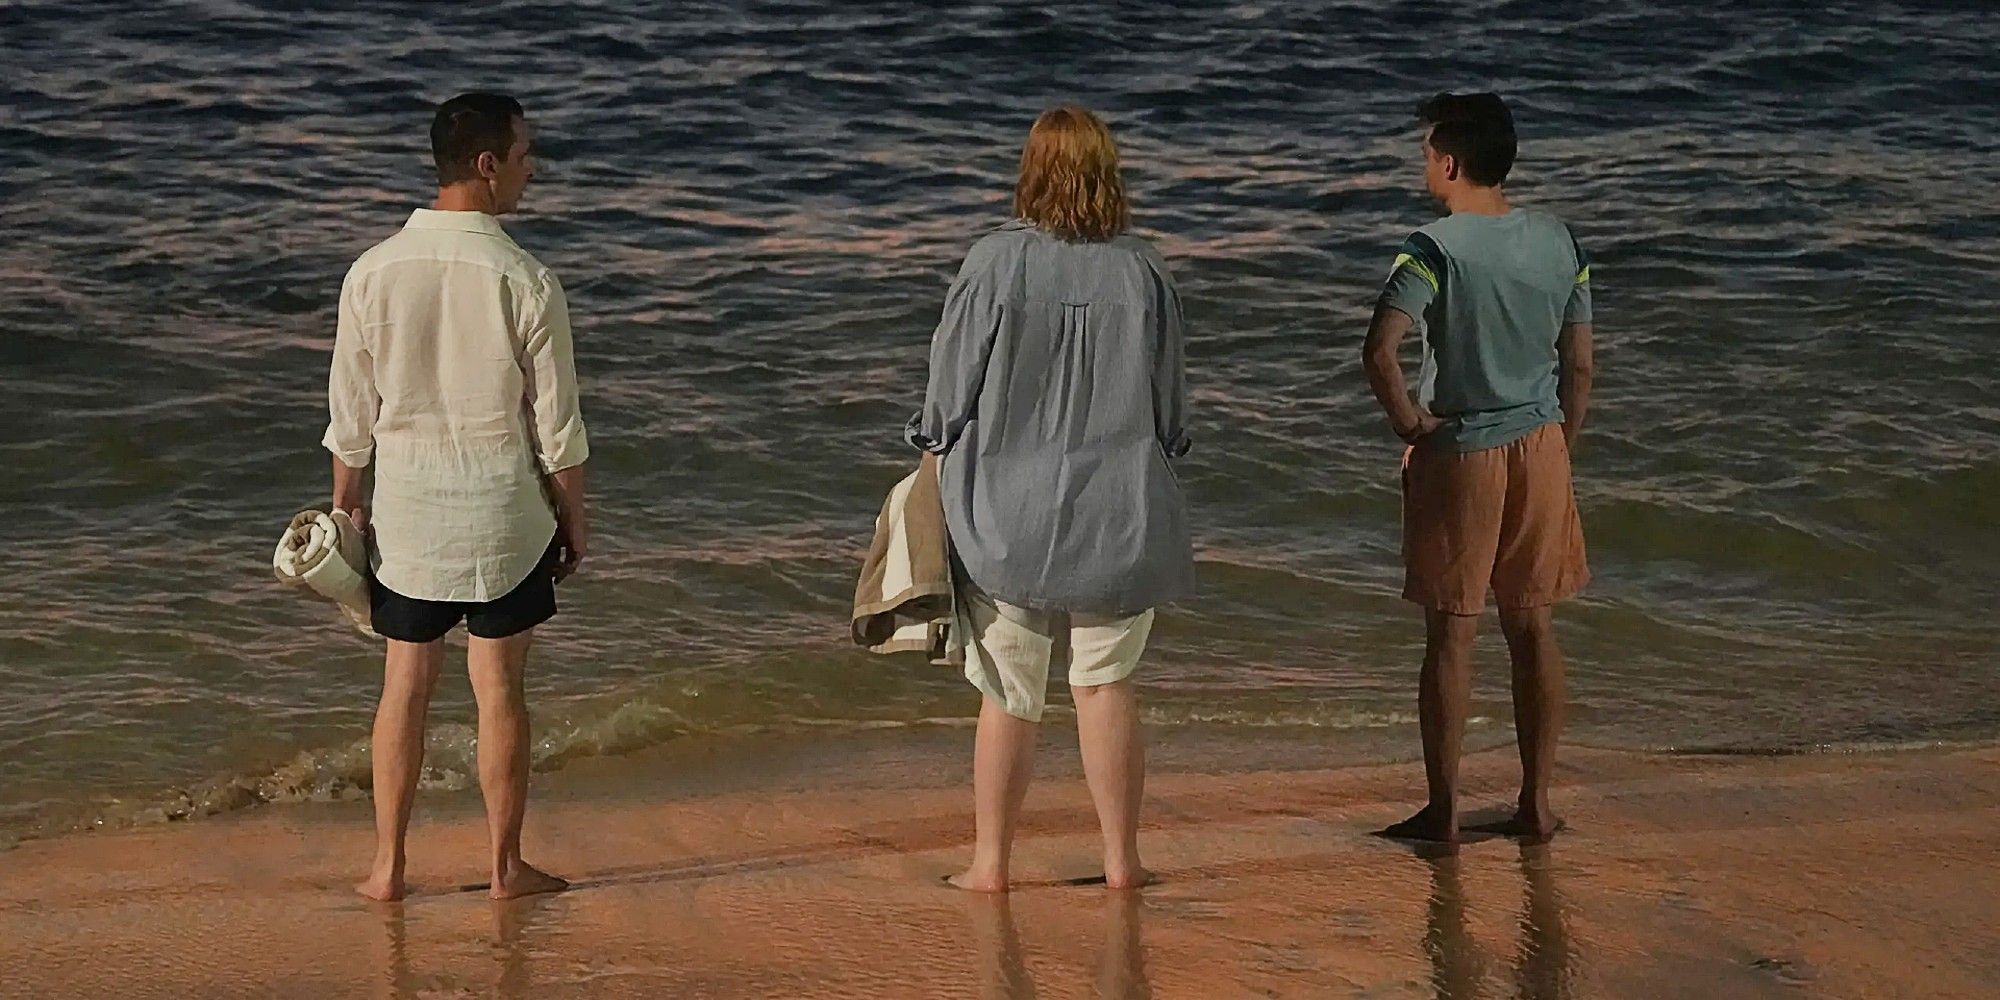 Kendall Roy, Shiv Roy, and Roman Roy on the beach in the Succession series finale